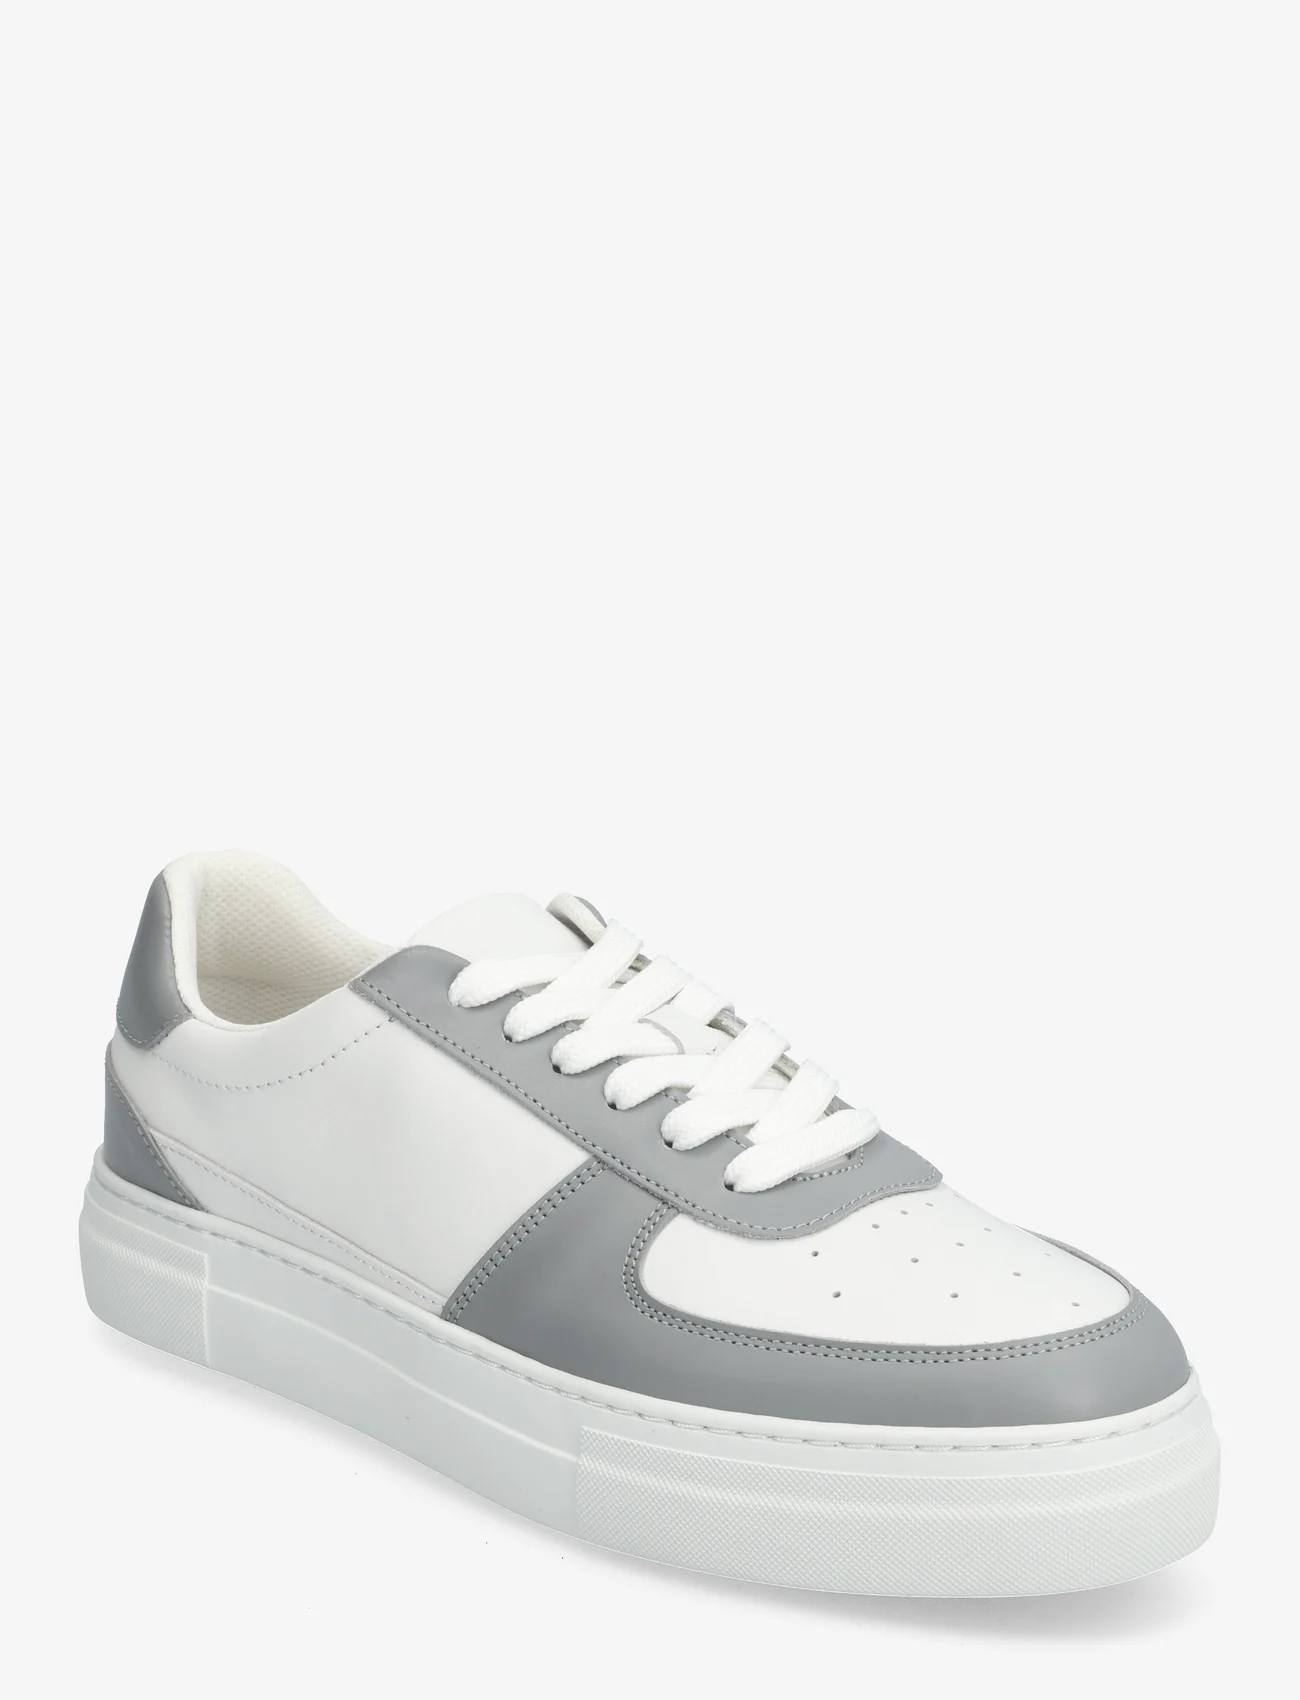 Selected Homme - SLHHARALD LEATHER SNEAKER - low tops - grey - 0